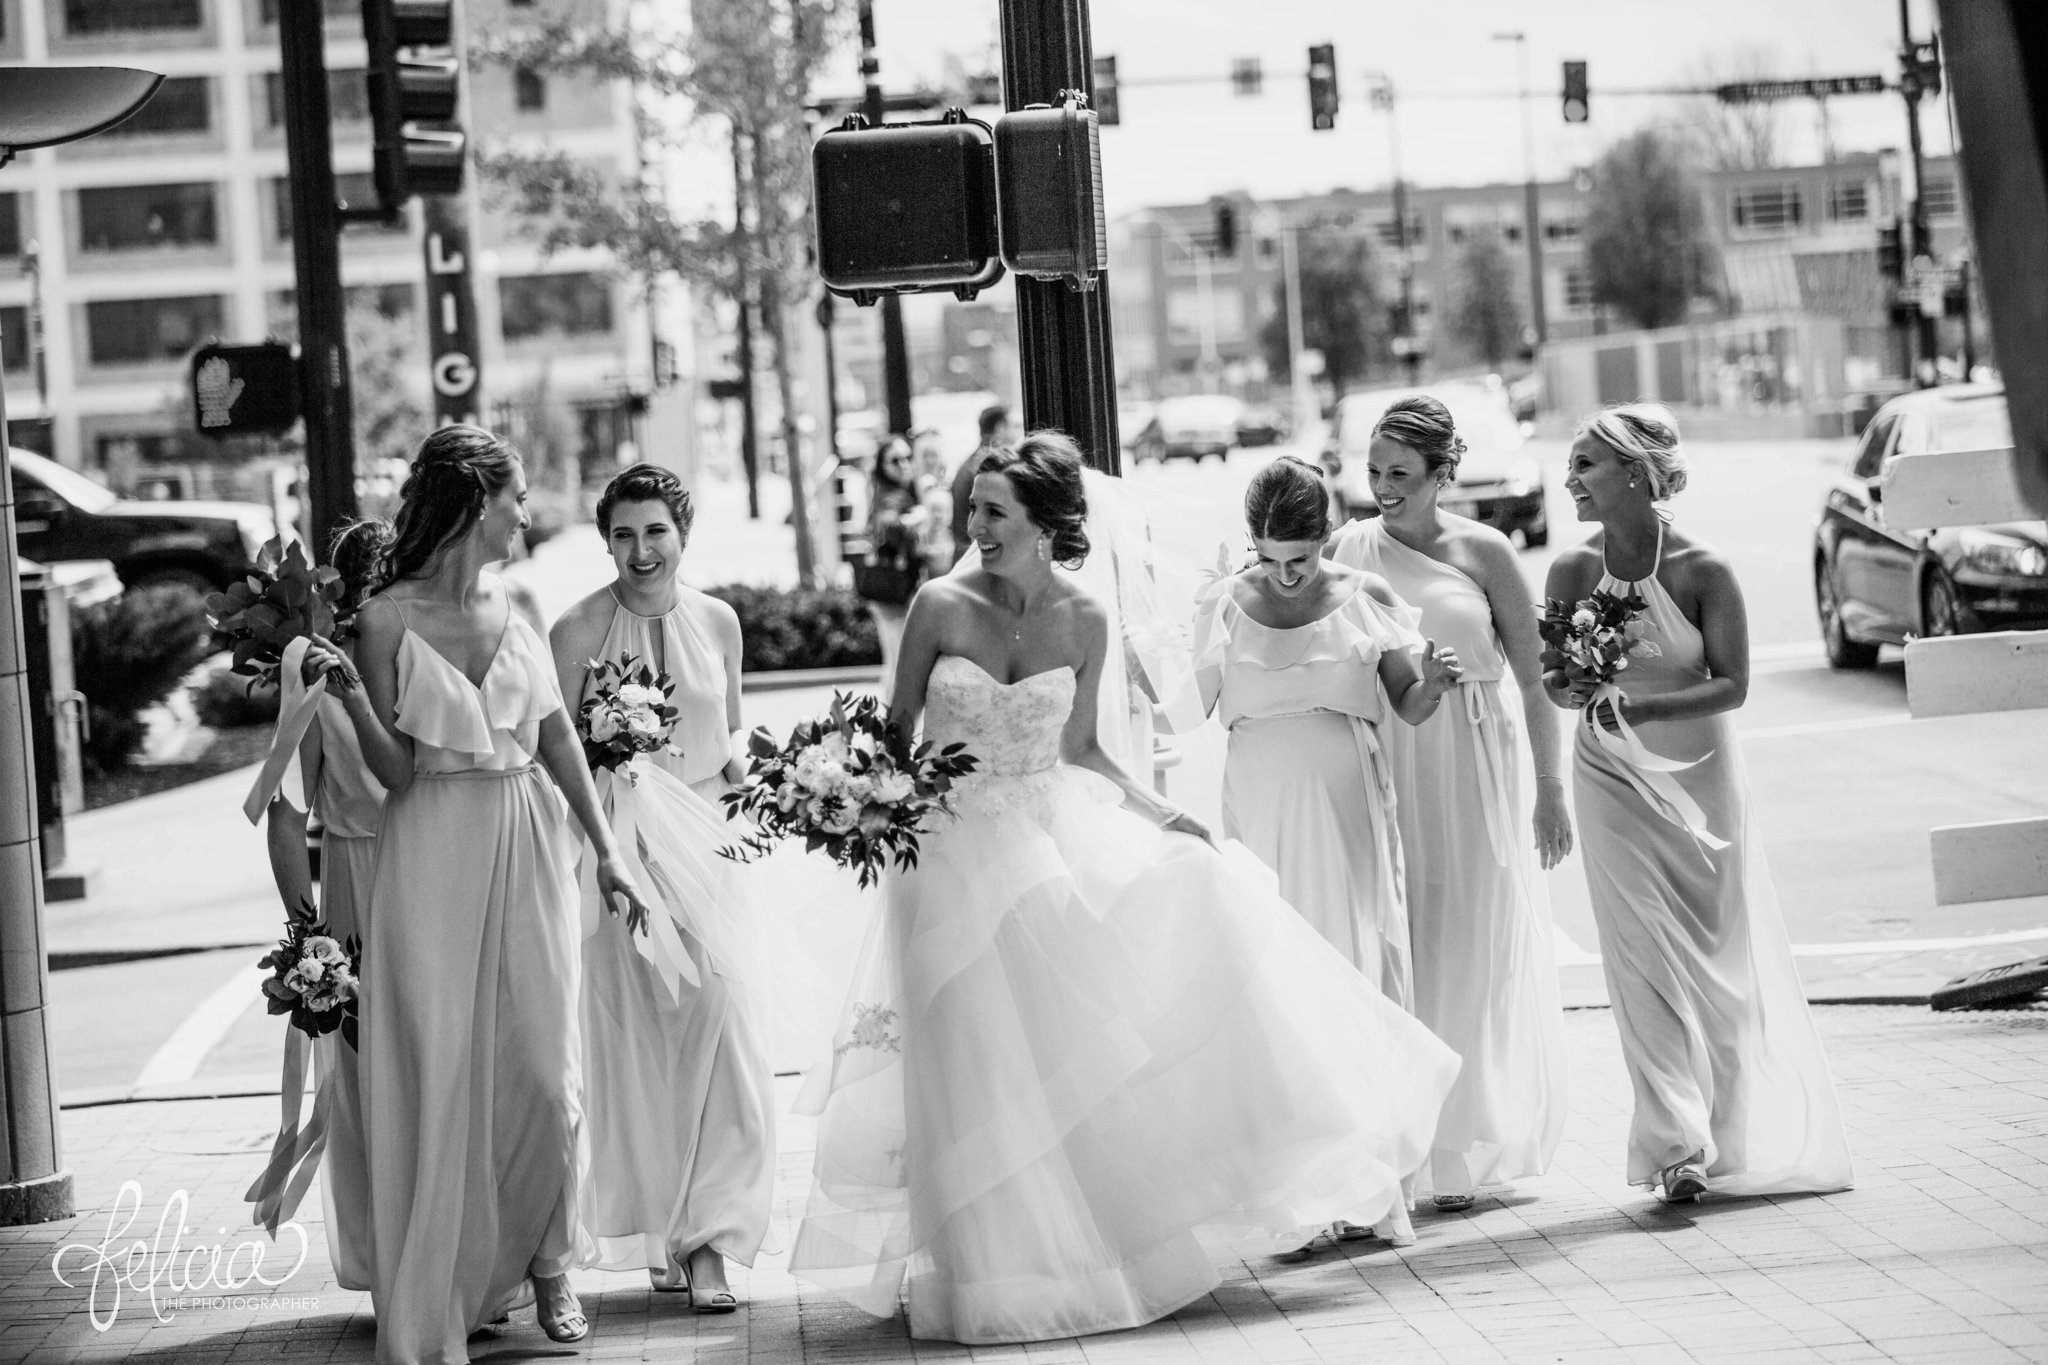 Grace and Holy Trinity Cathedral Wedding Photos | Kansas City | Candid Black and White Bridesmaids | Images by www.feliciathephotographer.com